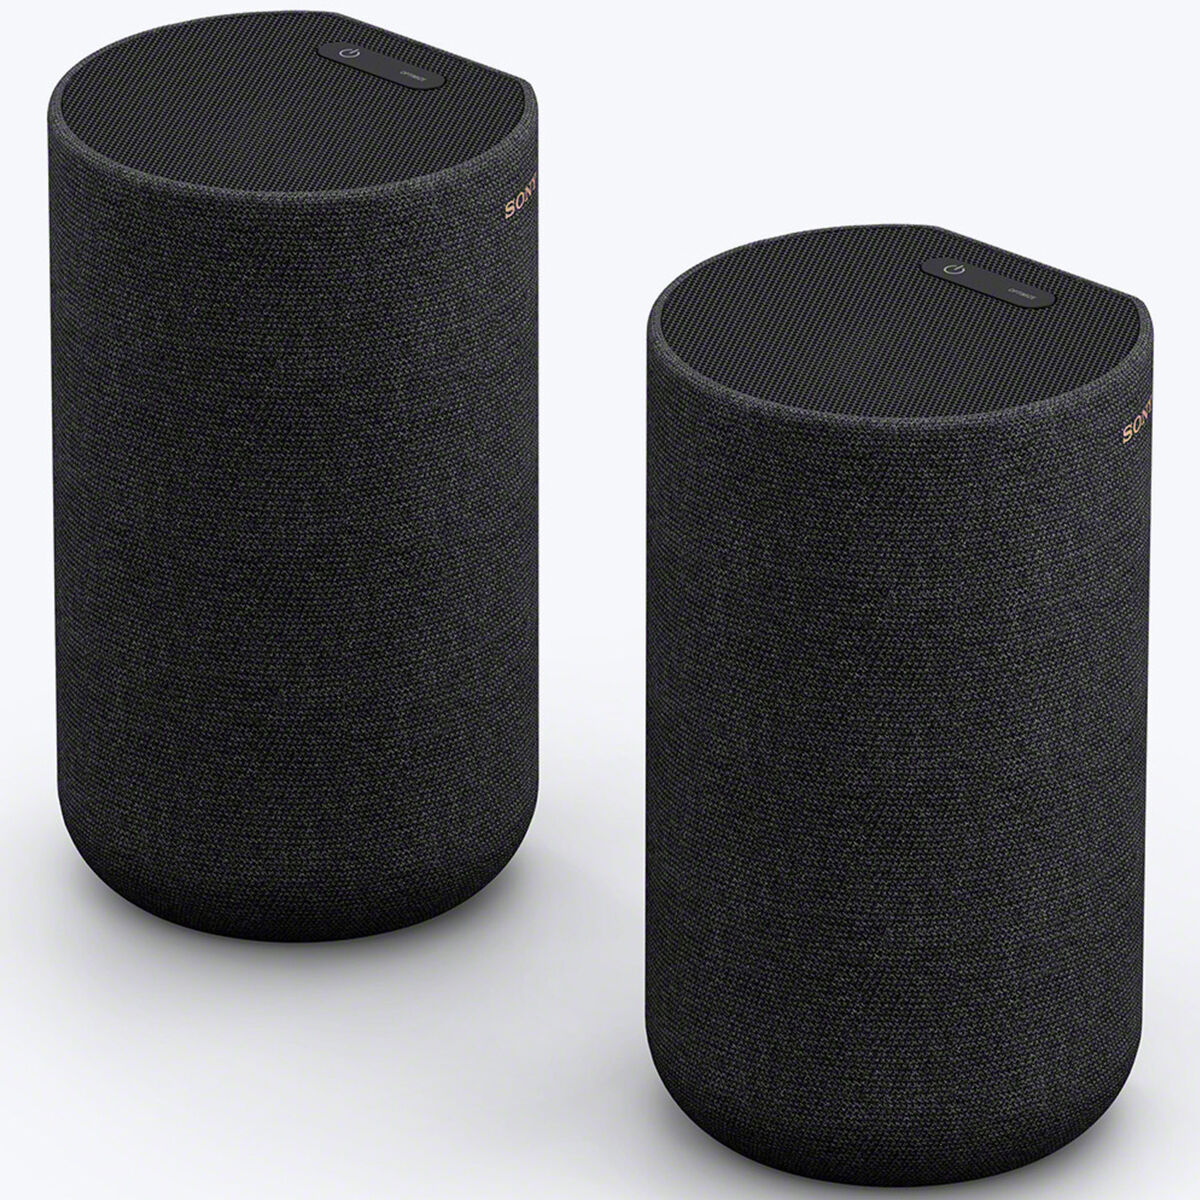 Sony Wireless Rear Speakers with Built-In Battery for  HT-A7000/HT-A5000/HT-A3000 Soundbars - Black